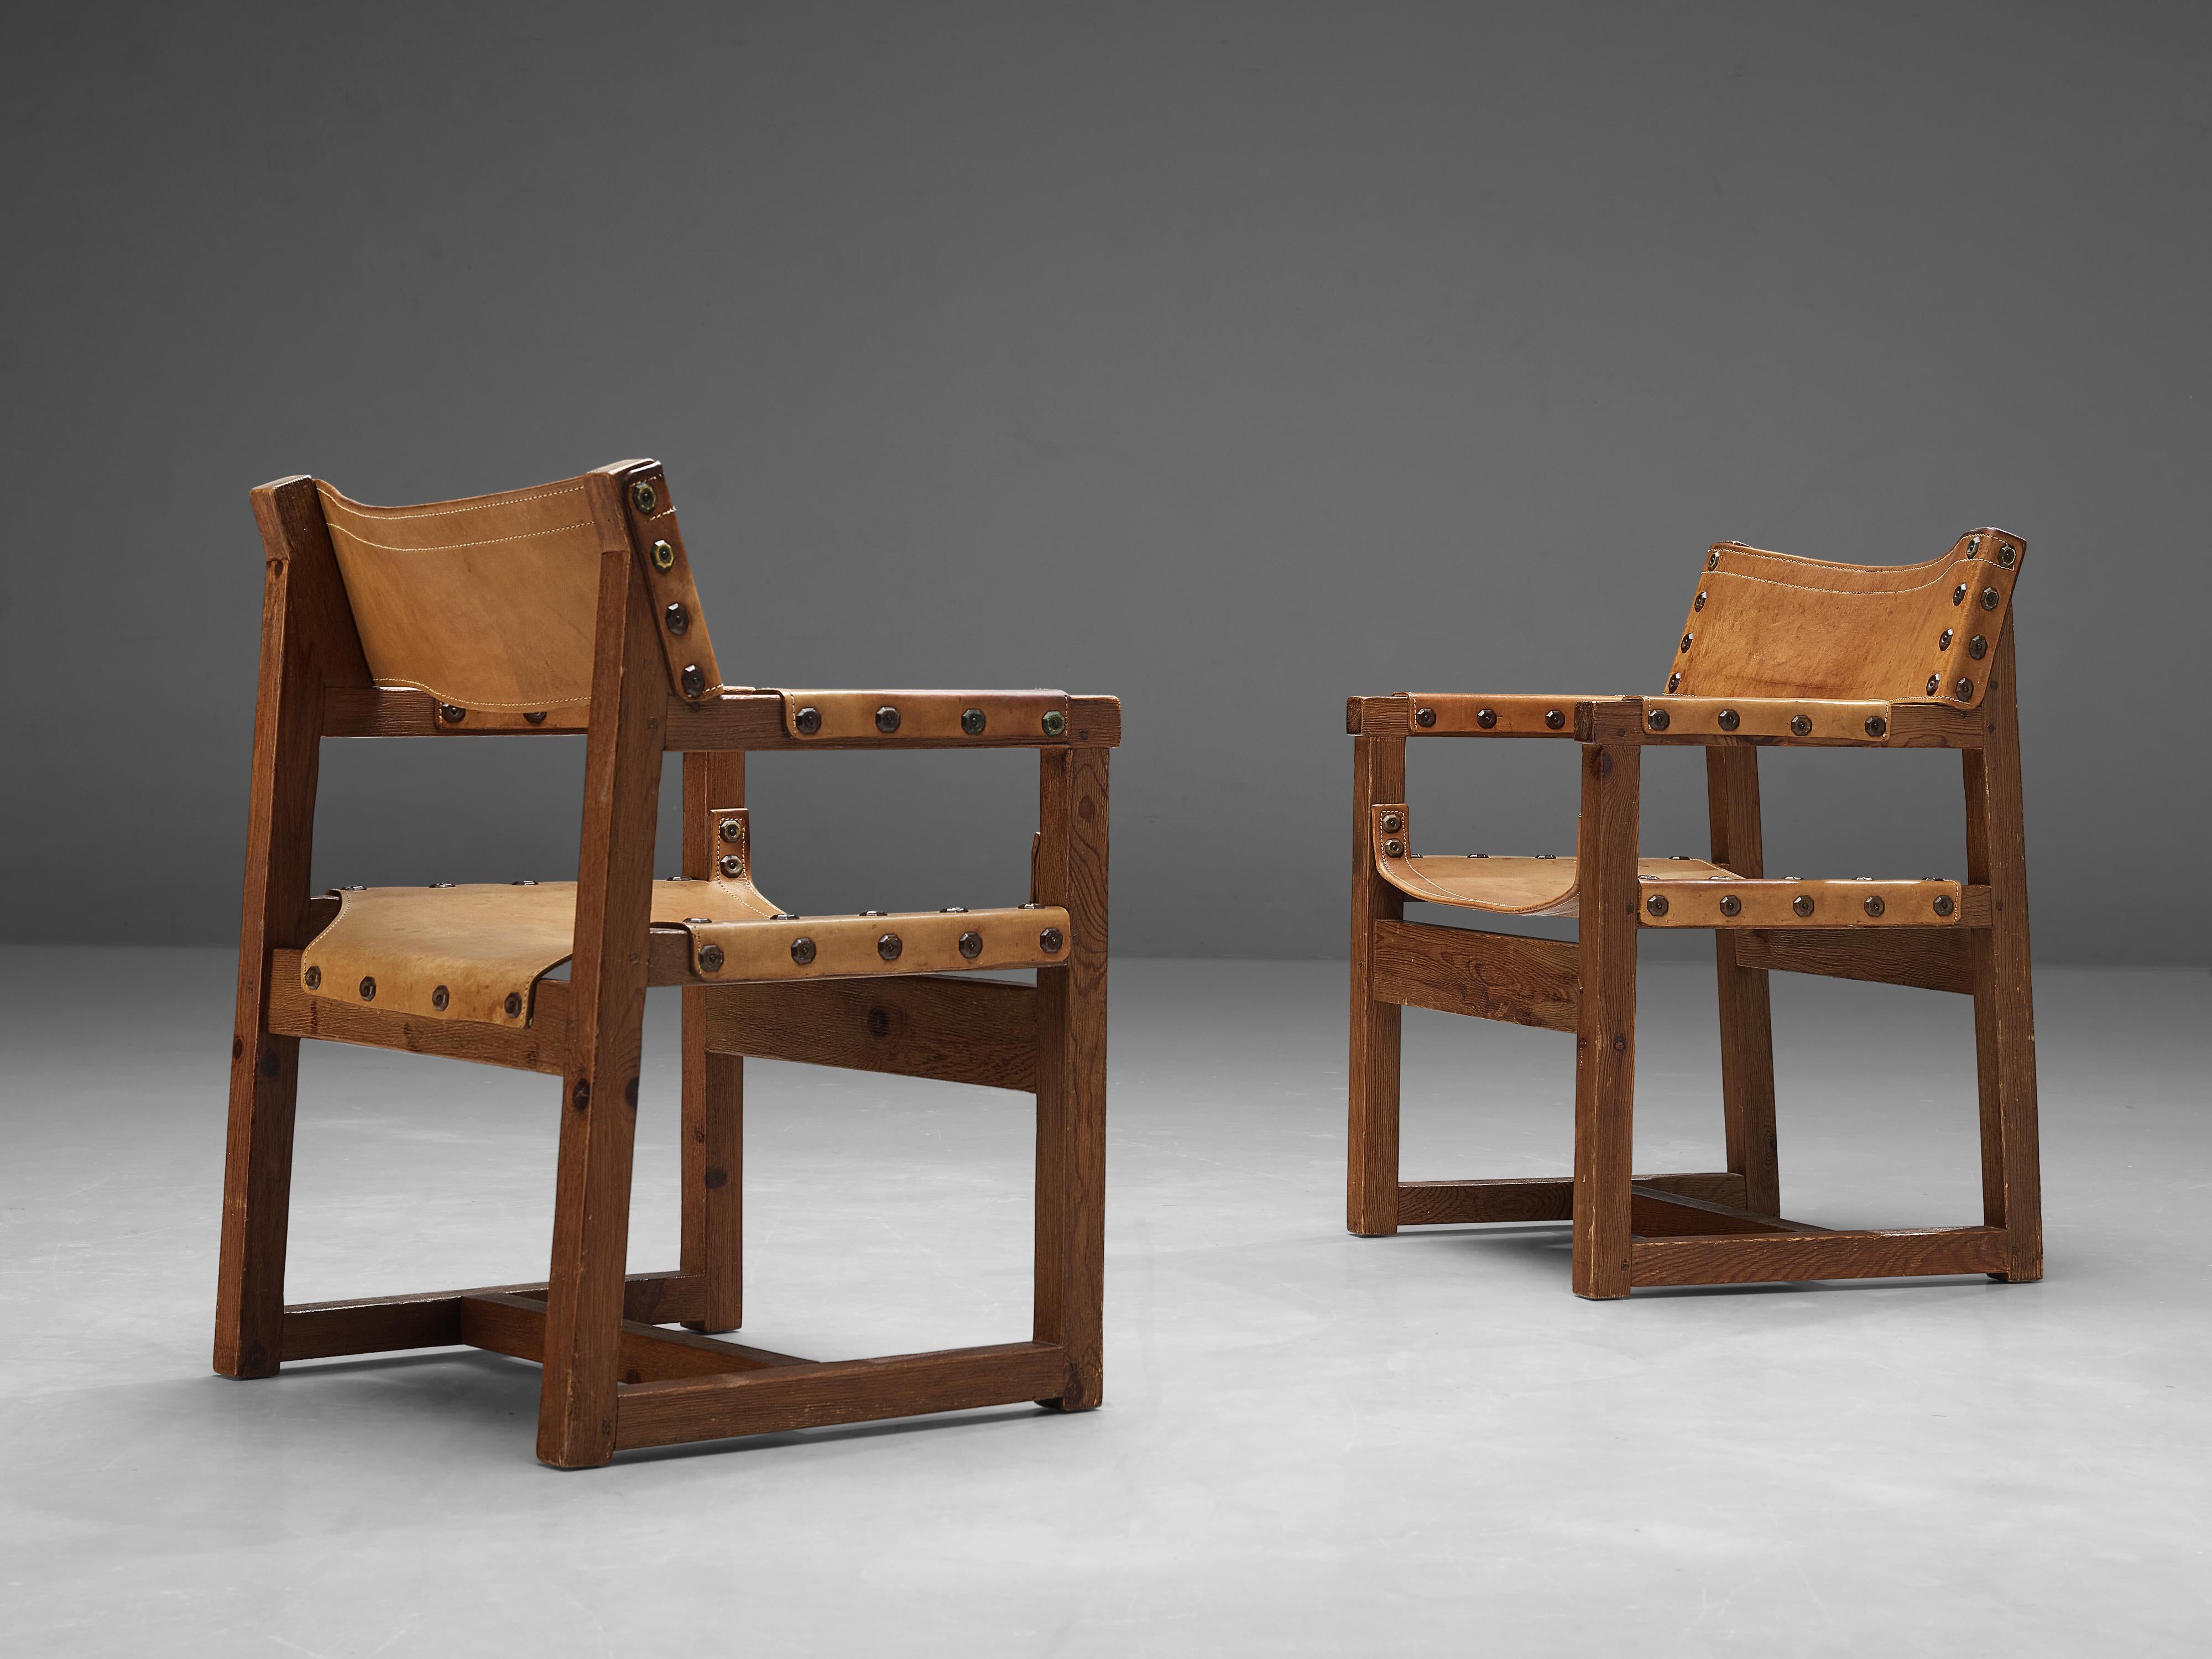 Biosca, pair of chairs, leather, pine, Spain, 1950s 

Sturdy chairs manufactured by the Spanish Biosca. These chairs are made out of pine and have stunning, leather seating. The chairs have a robust look, which is emphasized by decorative nails